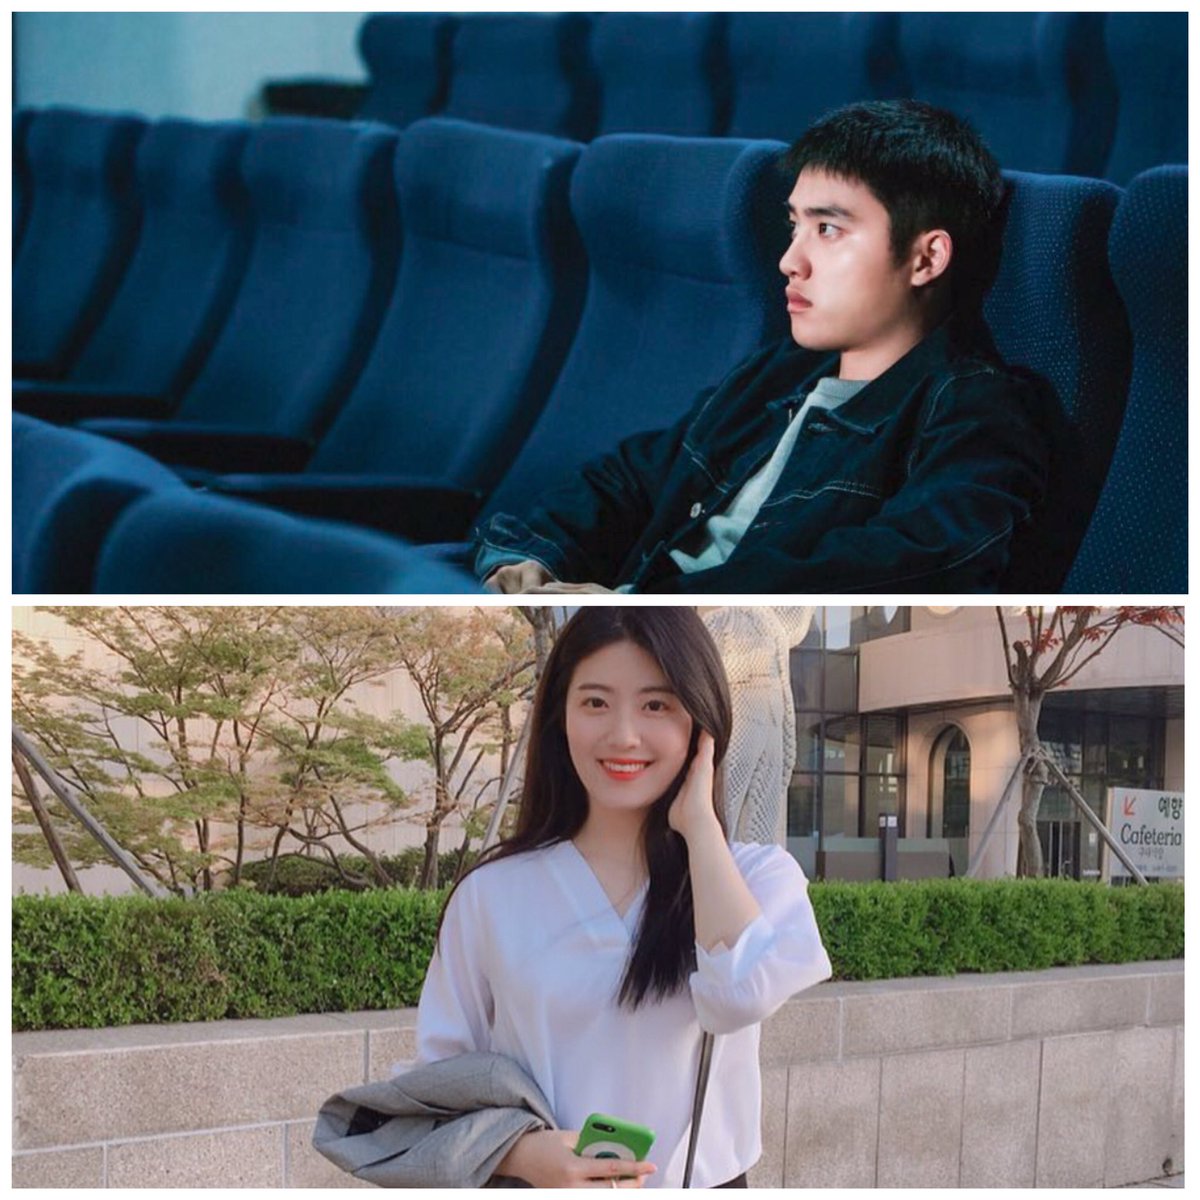 “See you later. I still want to pick you up, tho. This is a date night, not a business meeting.”“No need. Let’s save time & energy, ok, oppa? I promise I won’t be late.”“No rush. I’m camping out here & wait.”“You really like movies this much.”“No. I just really like you.”